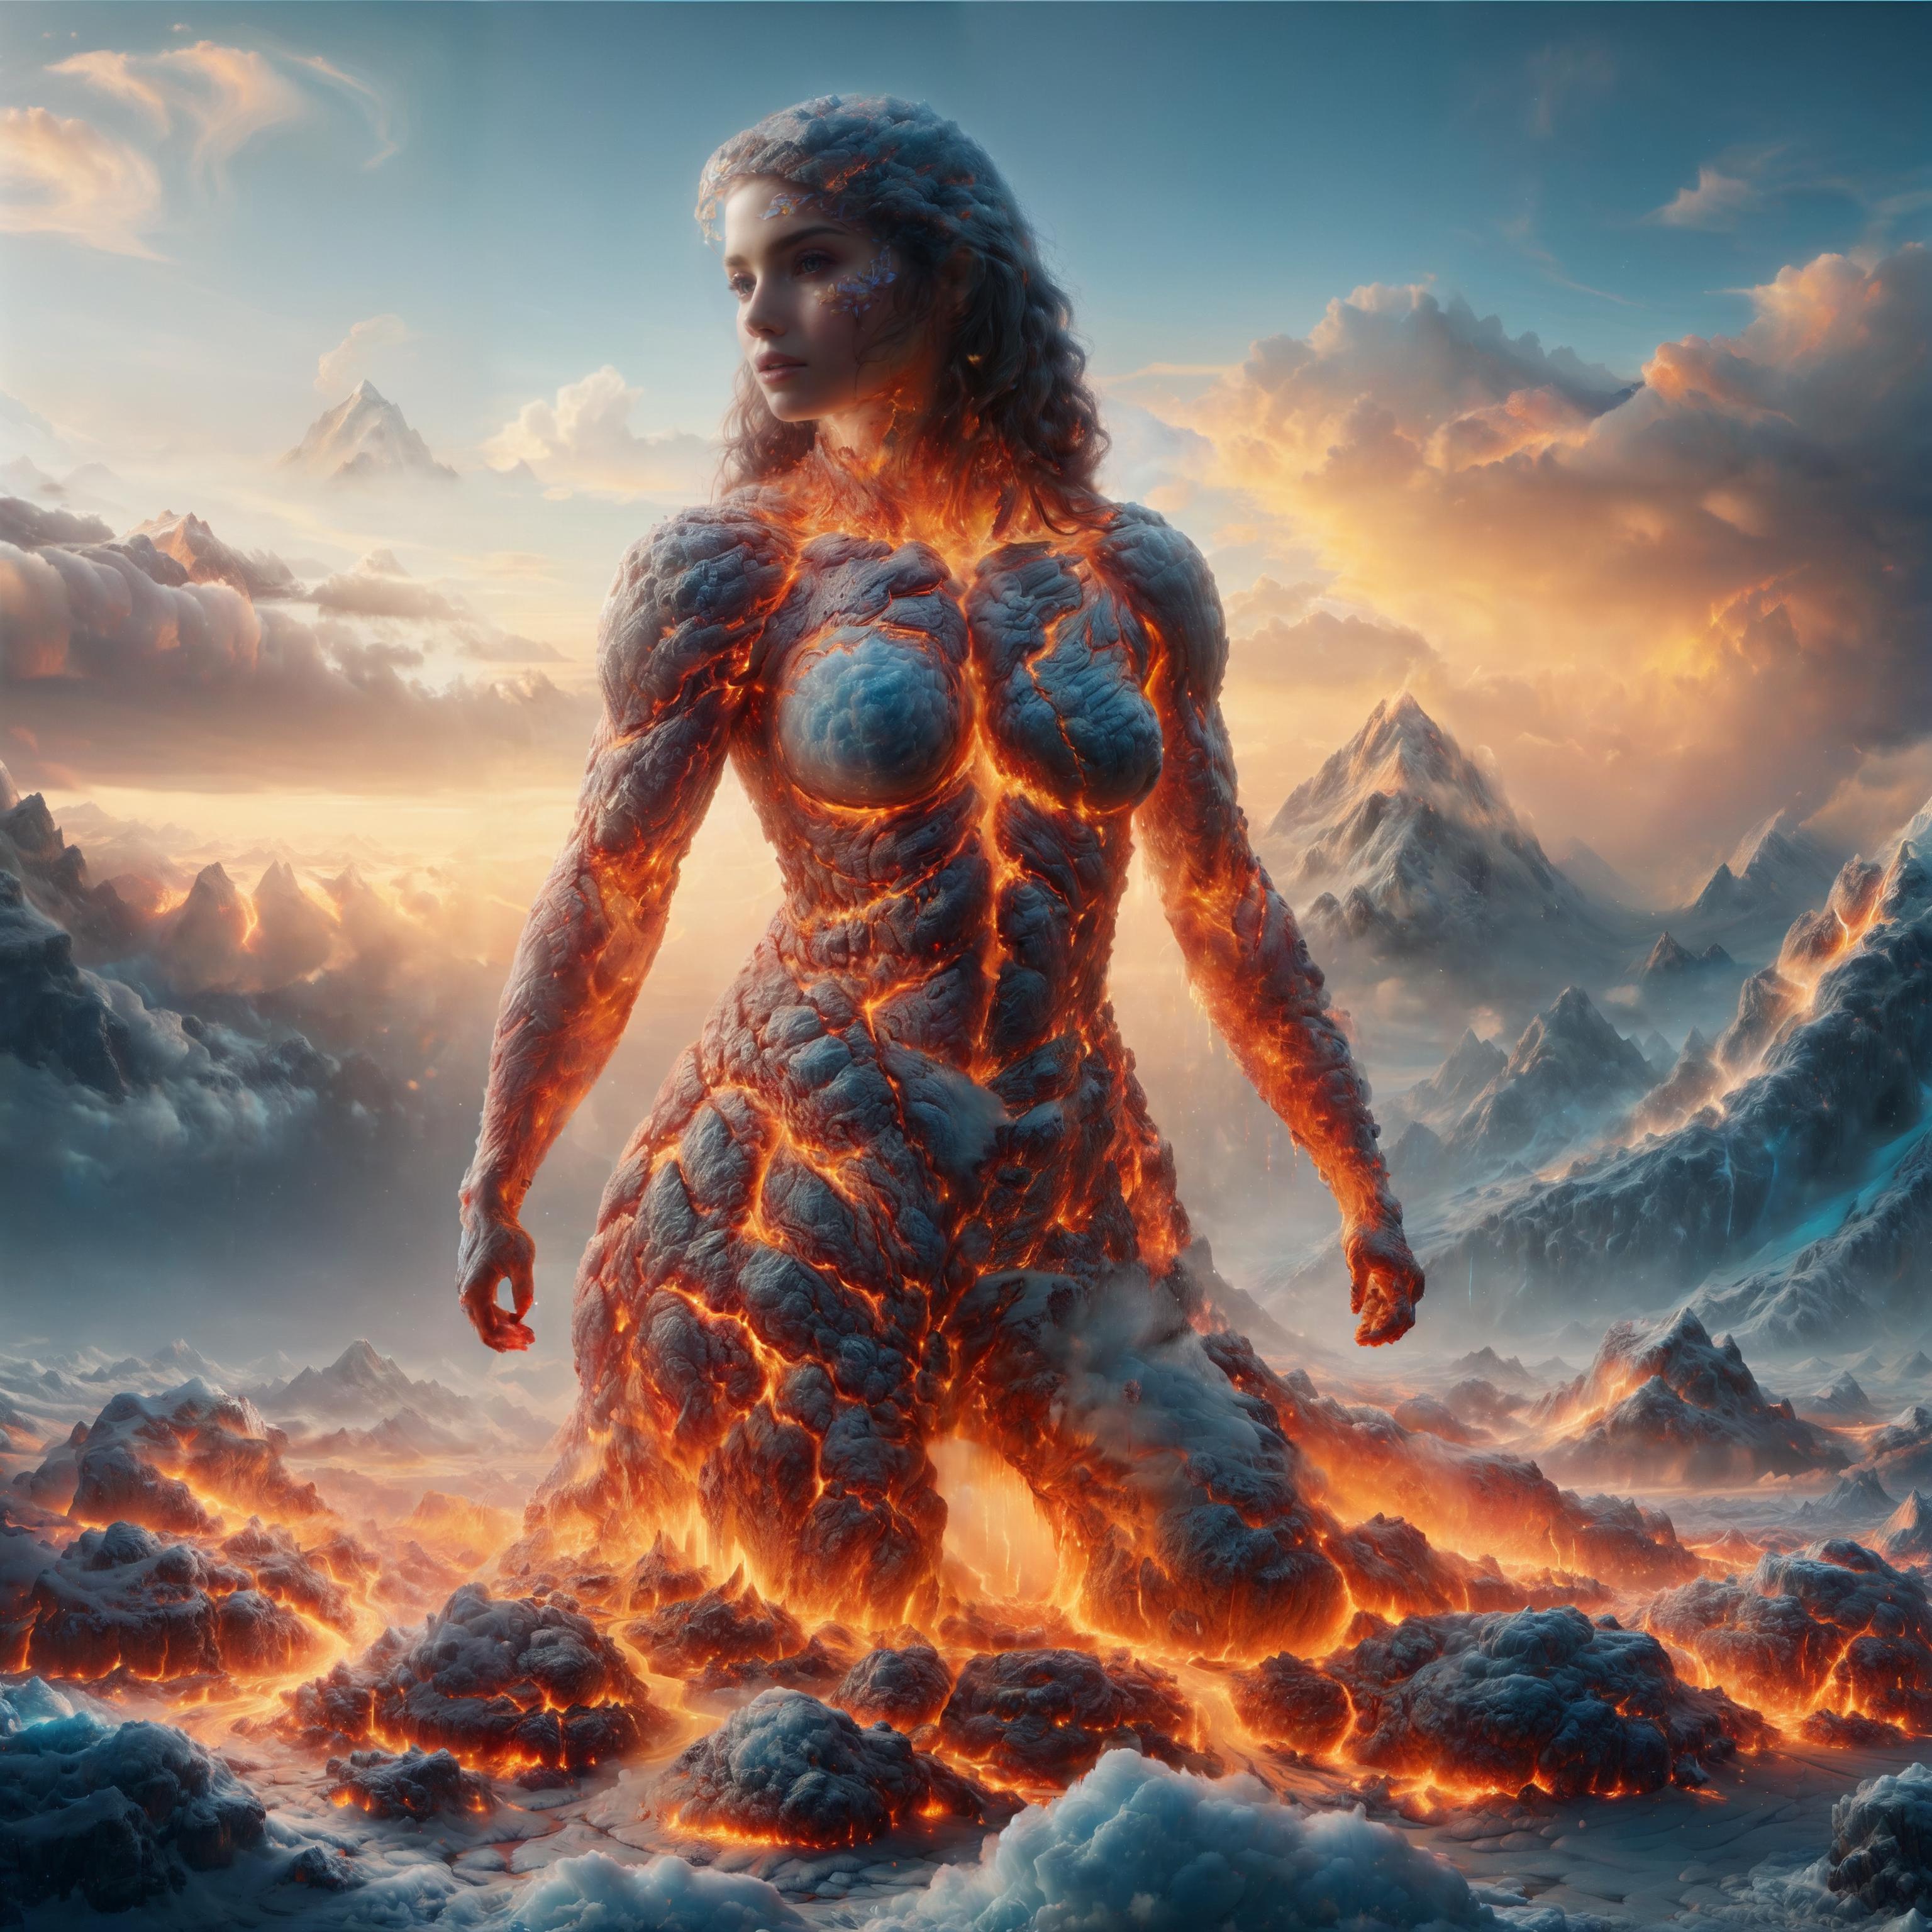 A woman with a fiery body sits on a volcanic mountain with clouds and mountains in the background.